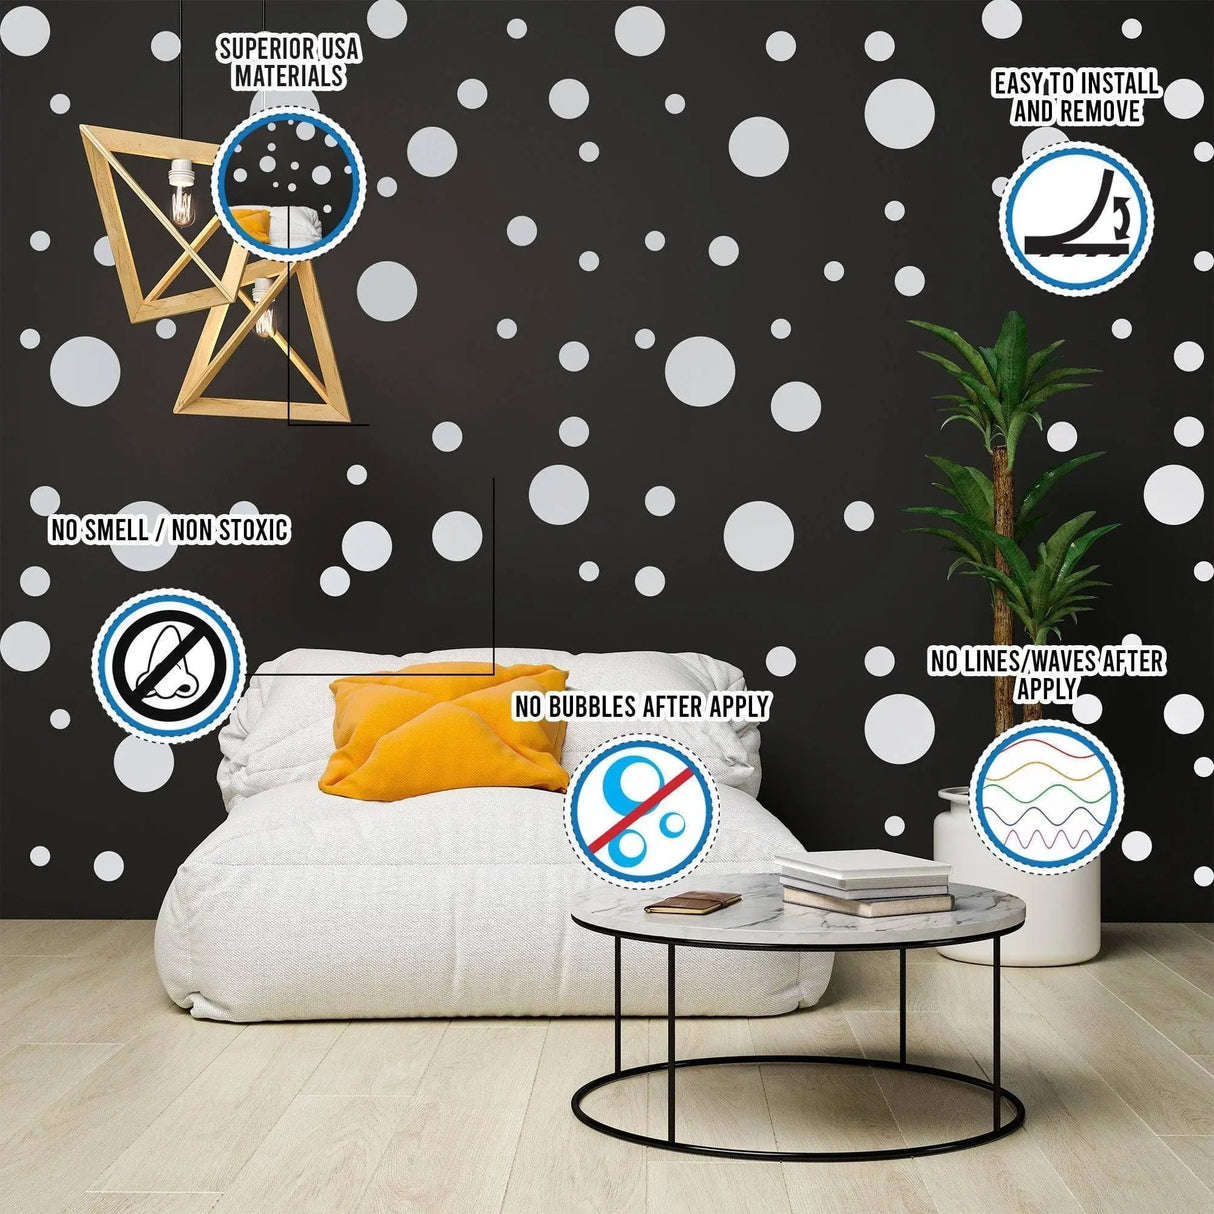  (6 inch) Set of 16 Black Stars Vinyl Wall Decals Stickers -  Removable Adhesive Safe on Smooth or Textured Walls Bathroom Kids Room  Nursery Decor : Baby